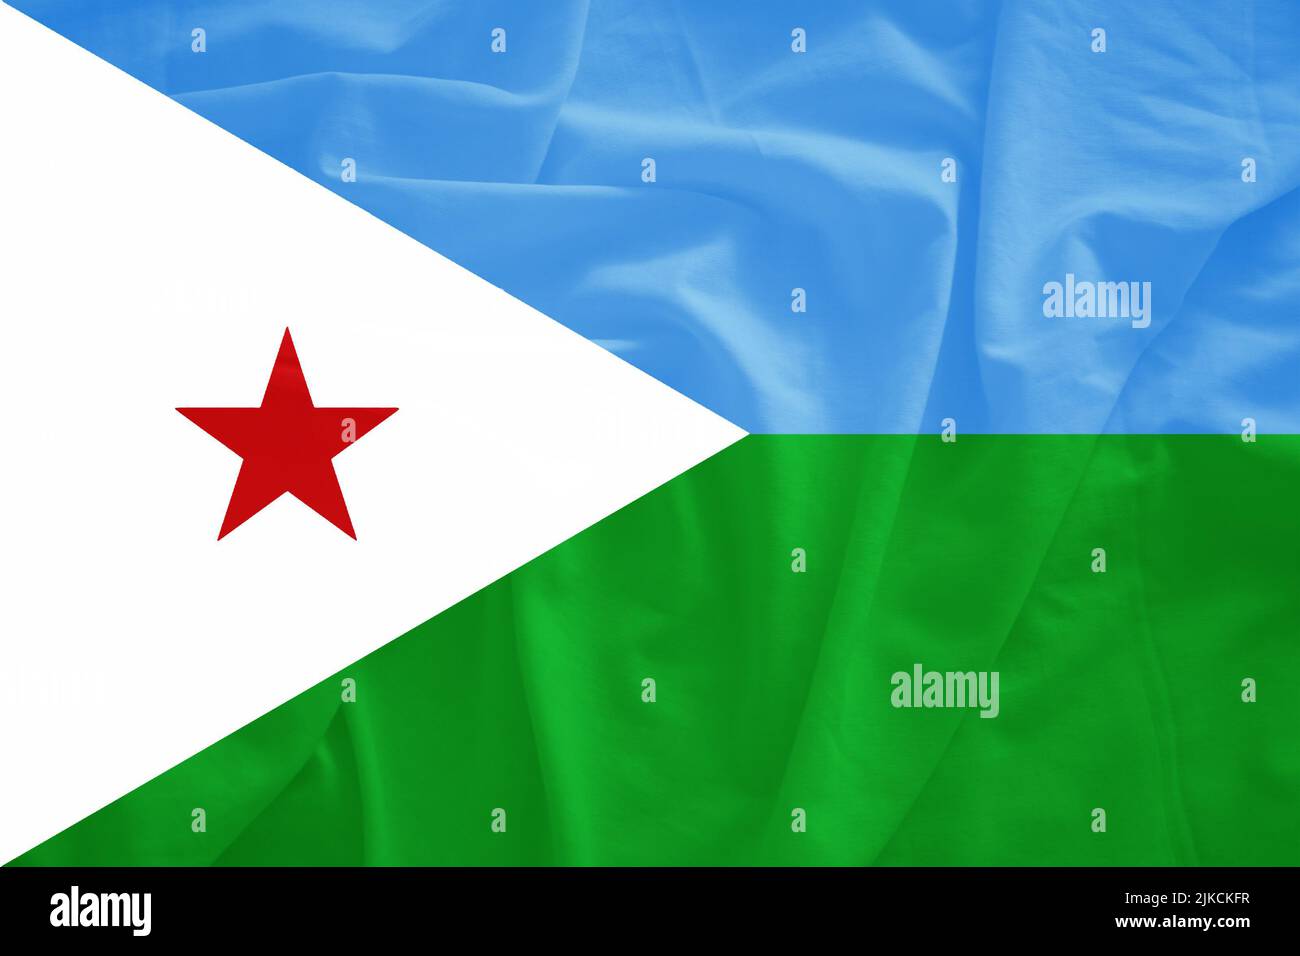 Djibouti flag with 3d effect Stock Photo